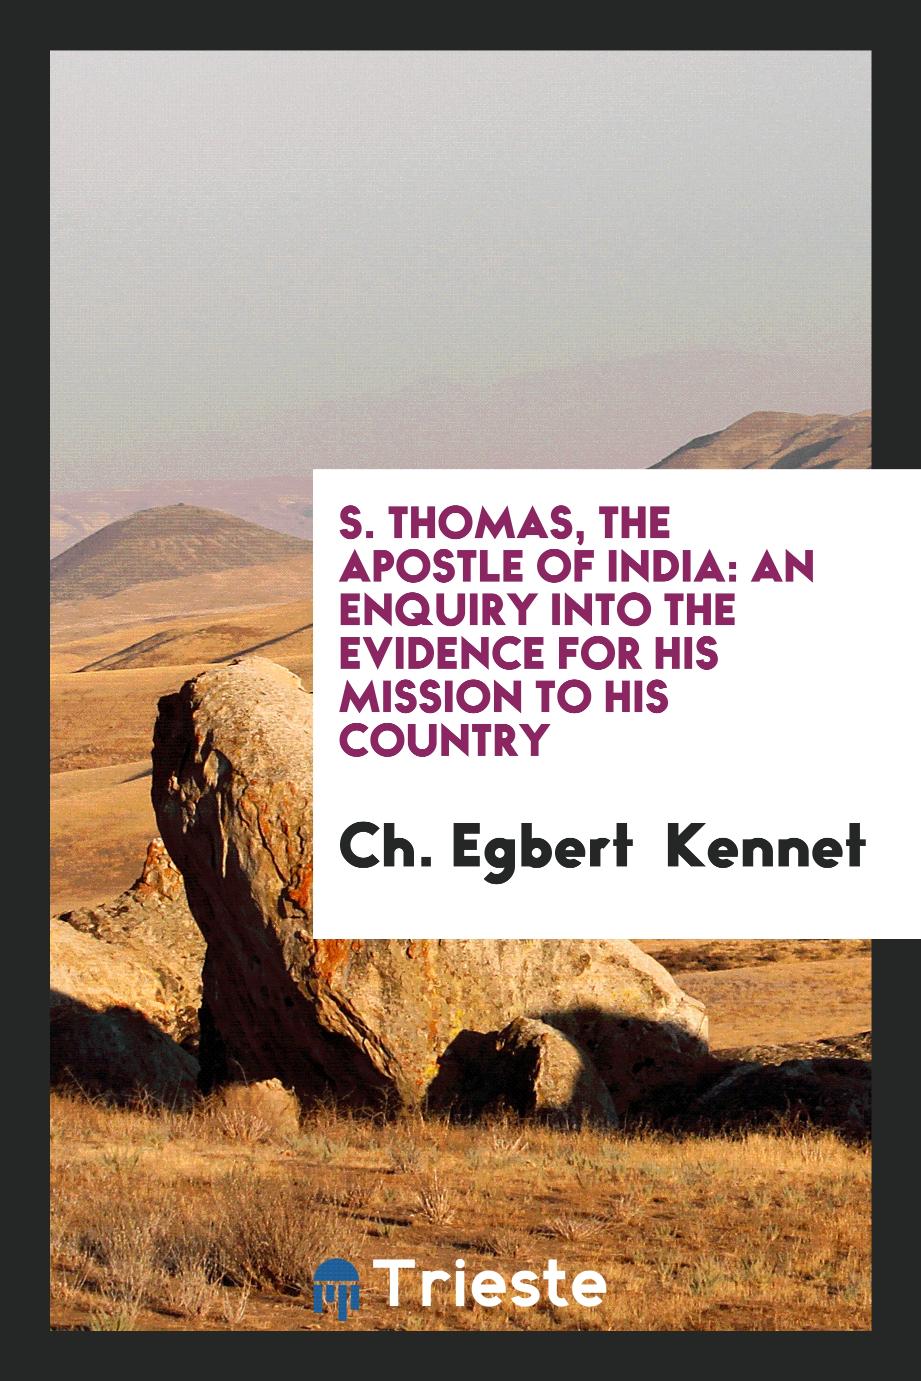 S. Thomas, the apostle of India: an enquiry into the evidence for his mission to his country